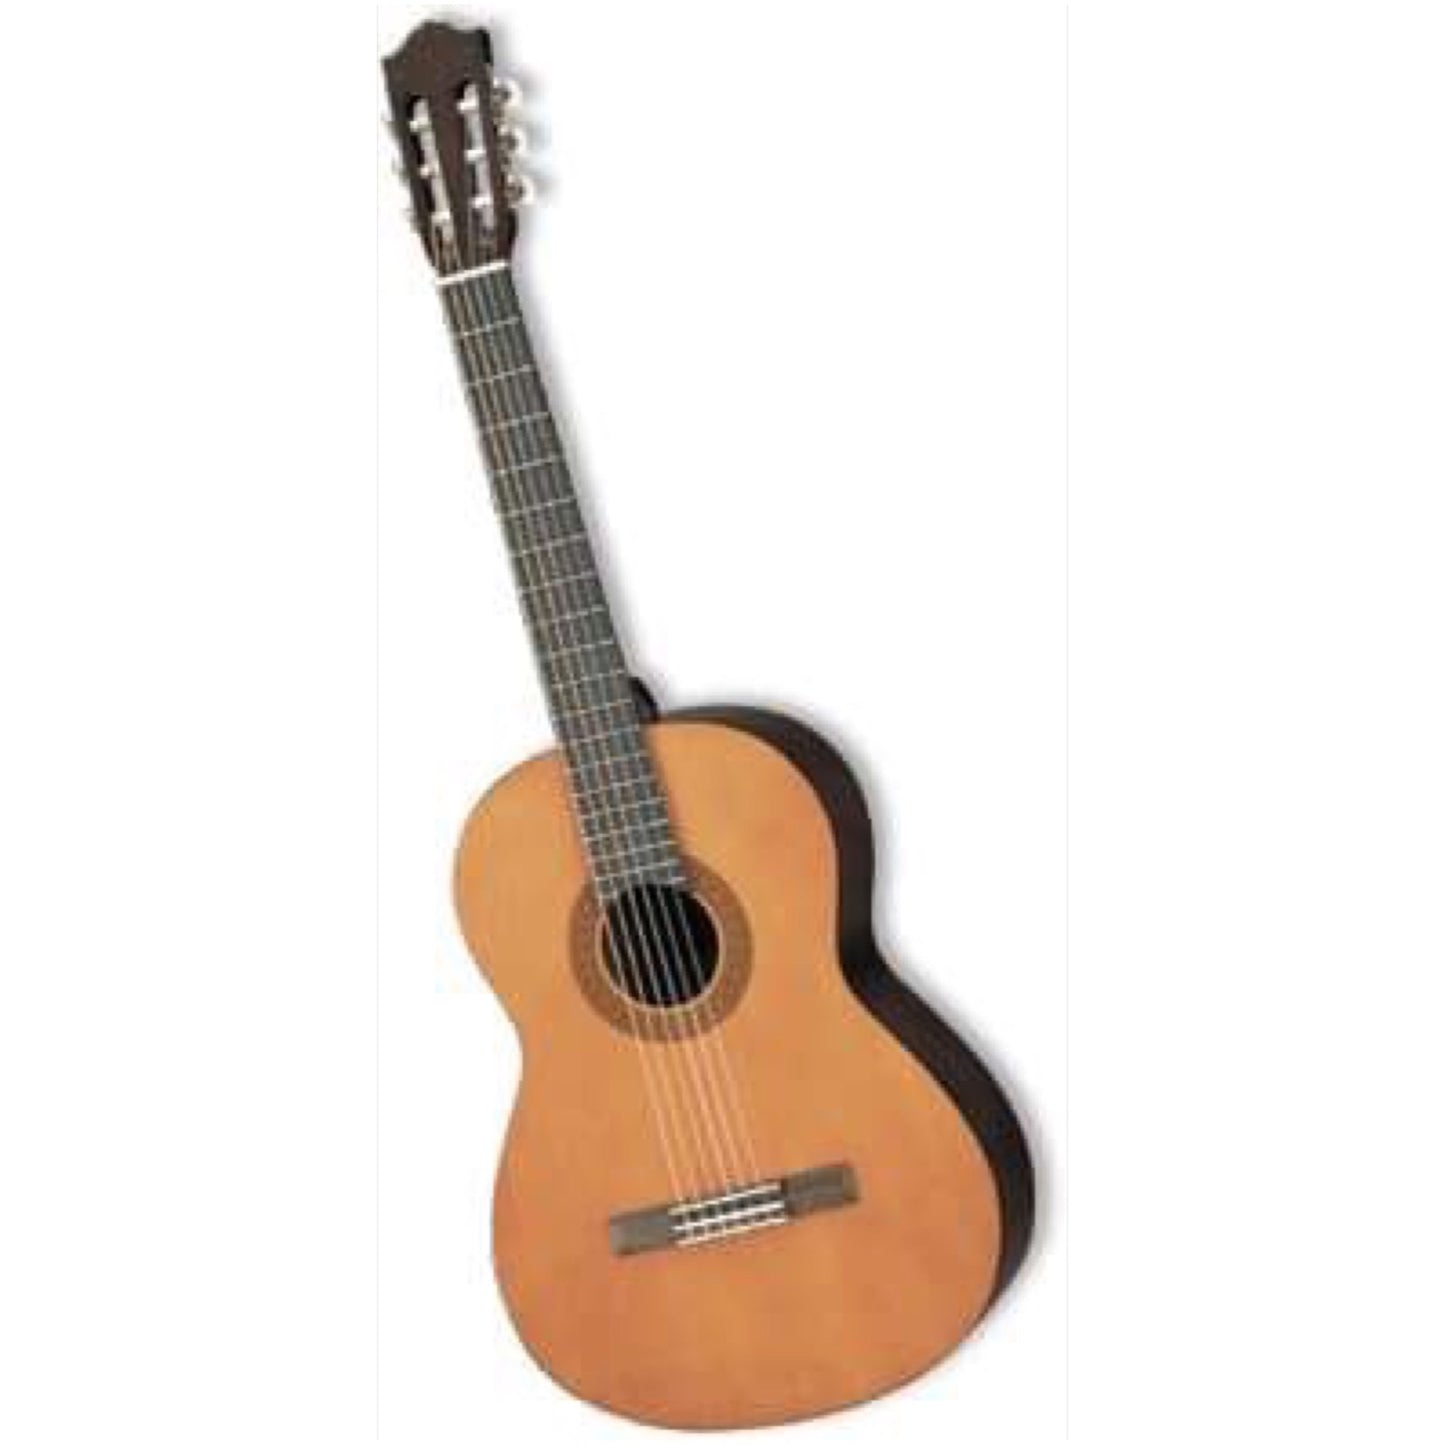 Yamaha C40 Classical Acoustic Guitar Package, with Guitar and Case